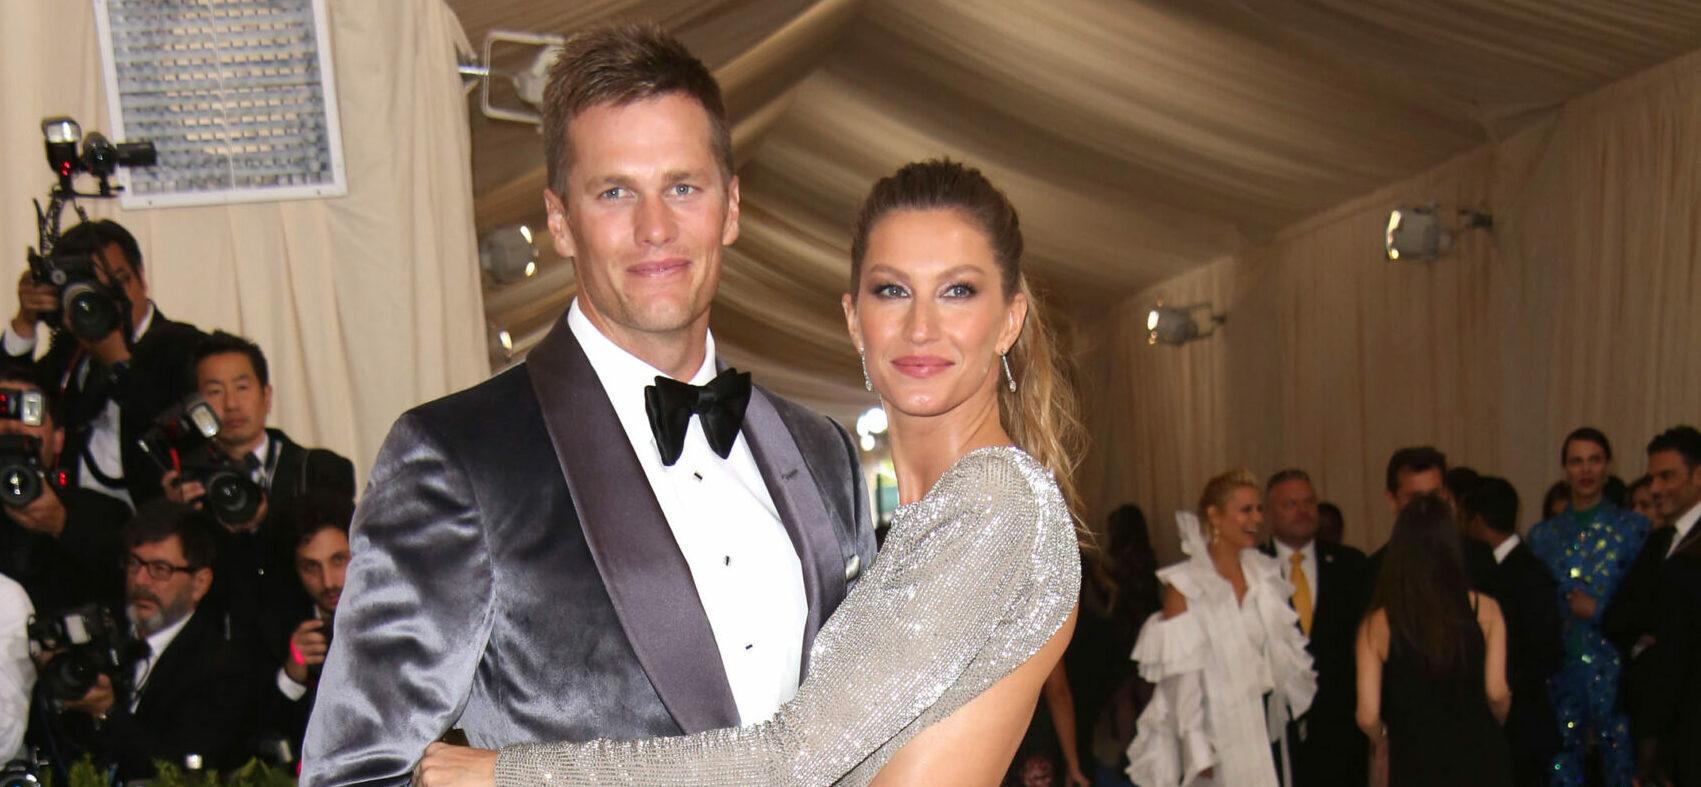 Gisele Bündchen Left Upset By ‘Irresponsible’ Jokes About Marriage To Tom Brady During Roast